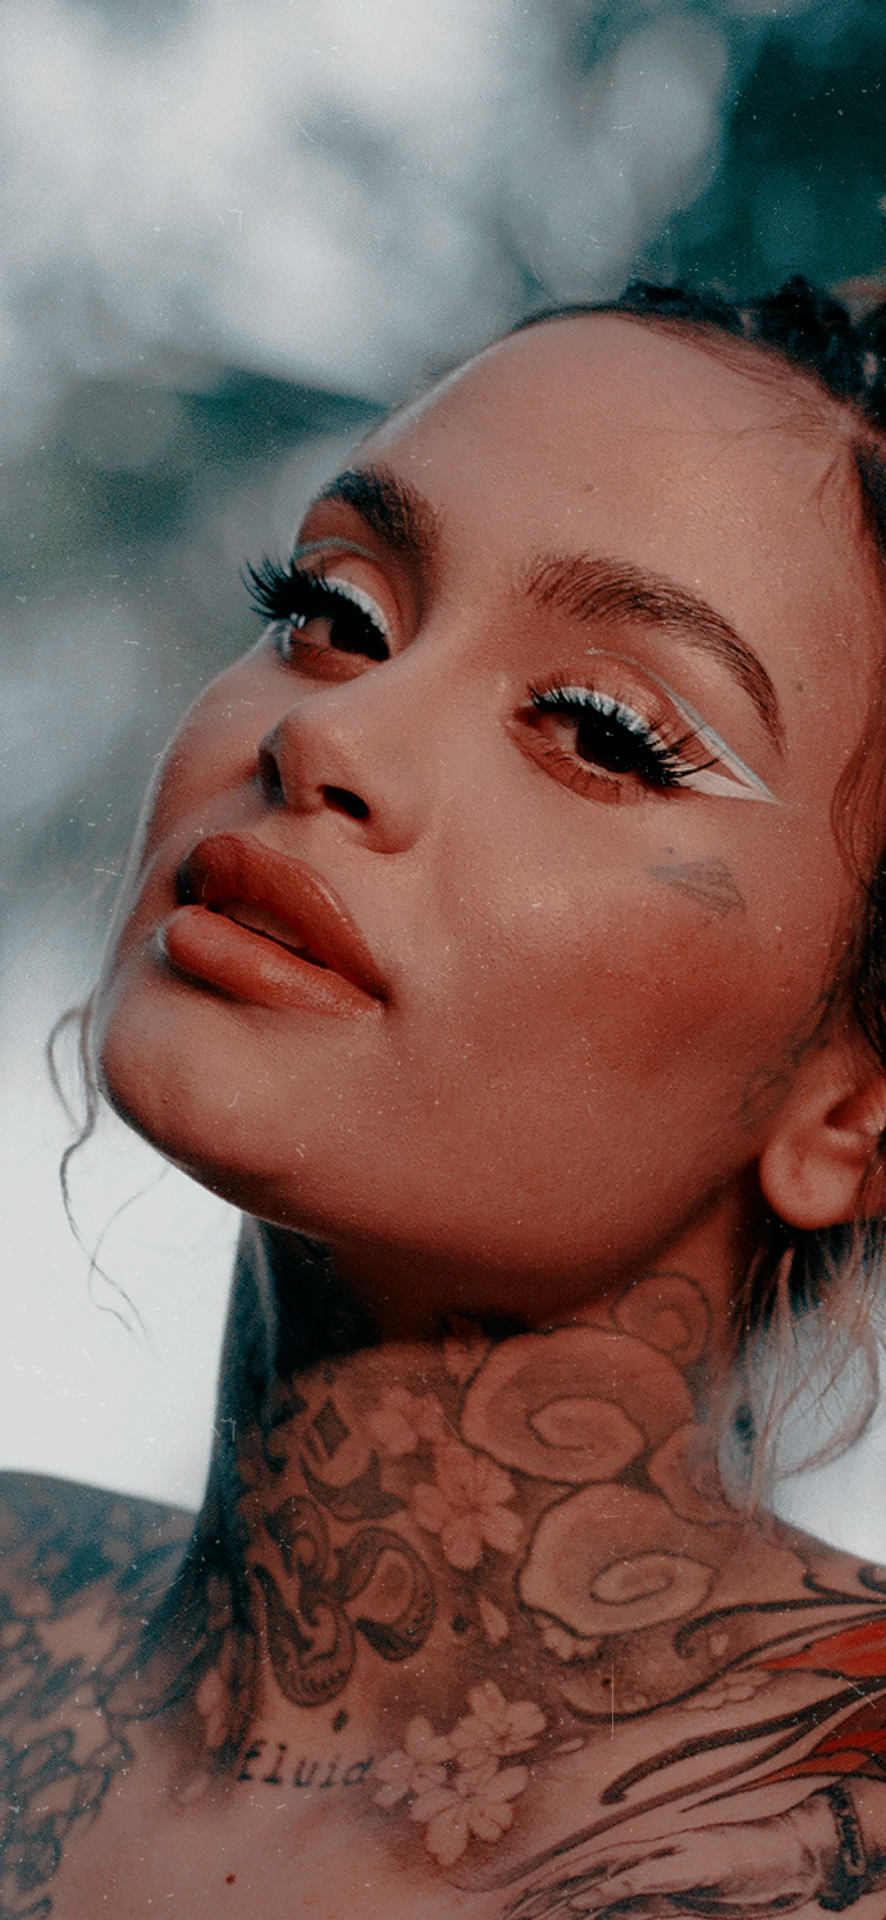 THE AESTHENTIC  Kehlani wallpapers for iPhone and other mobile